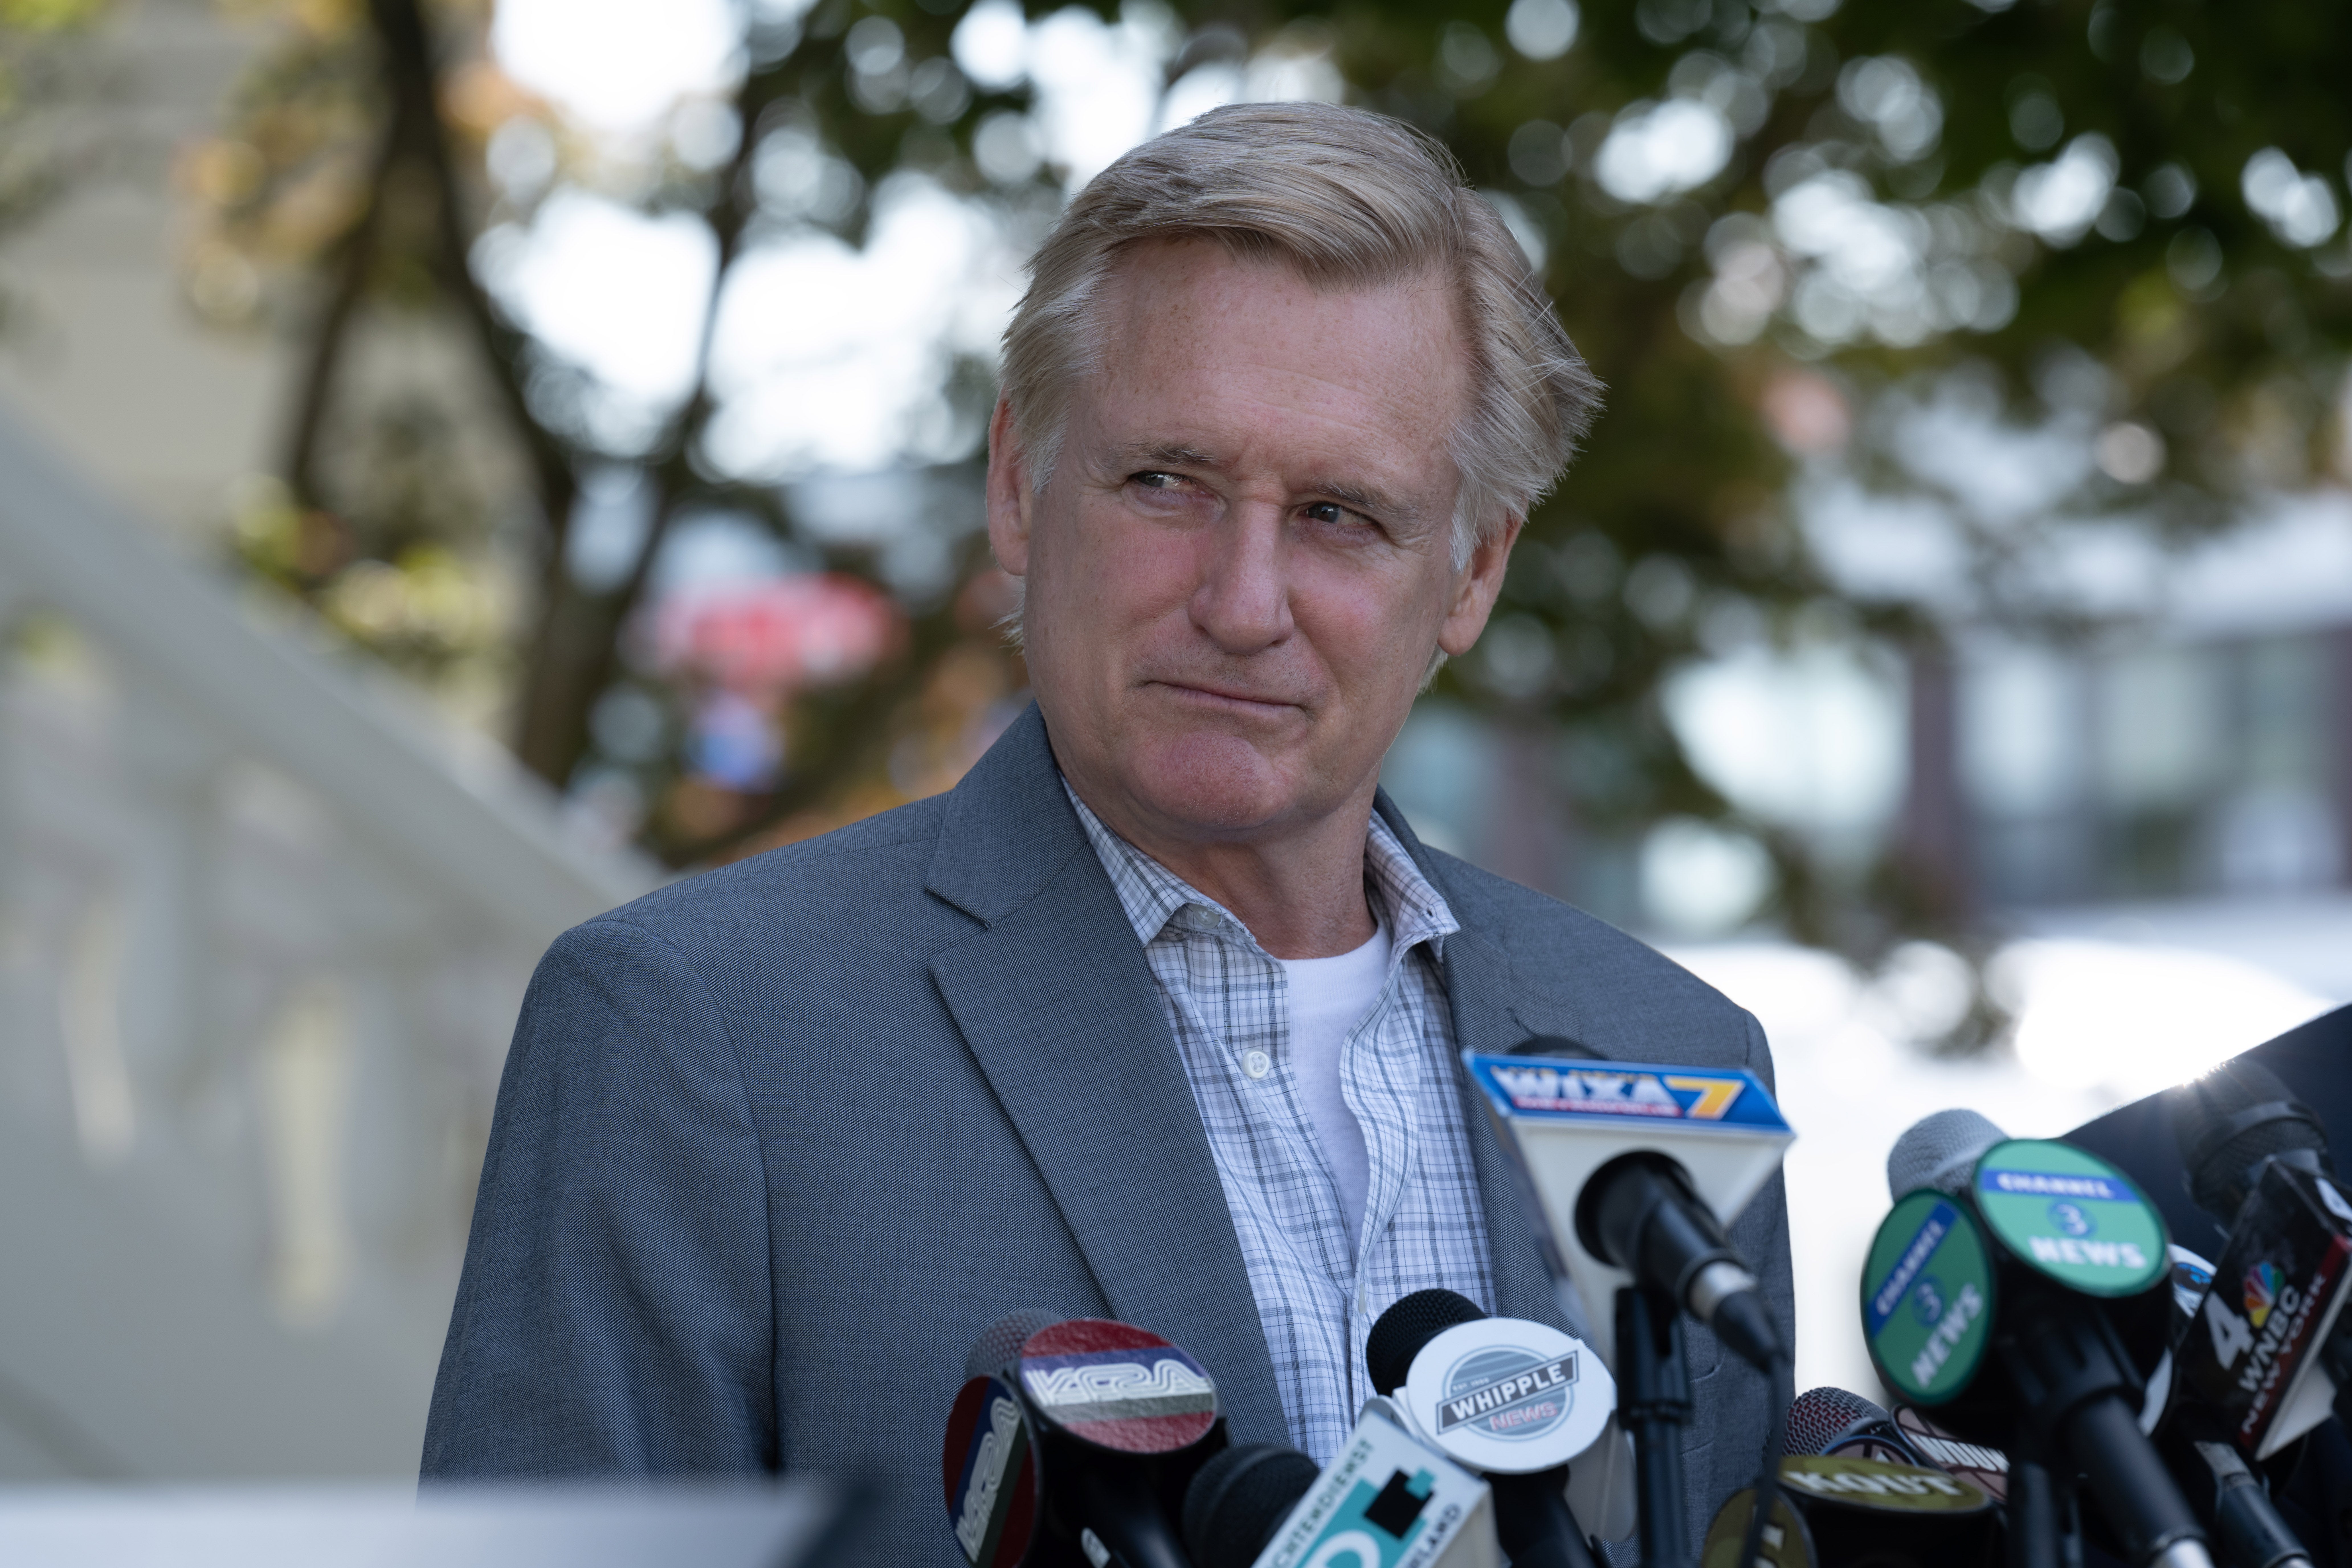 Bill Pullman plays convicted killer Alex Murdaugh in the new Lifetime movie ‘Murdaugh Murders: The Movie’ - set to air in October